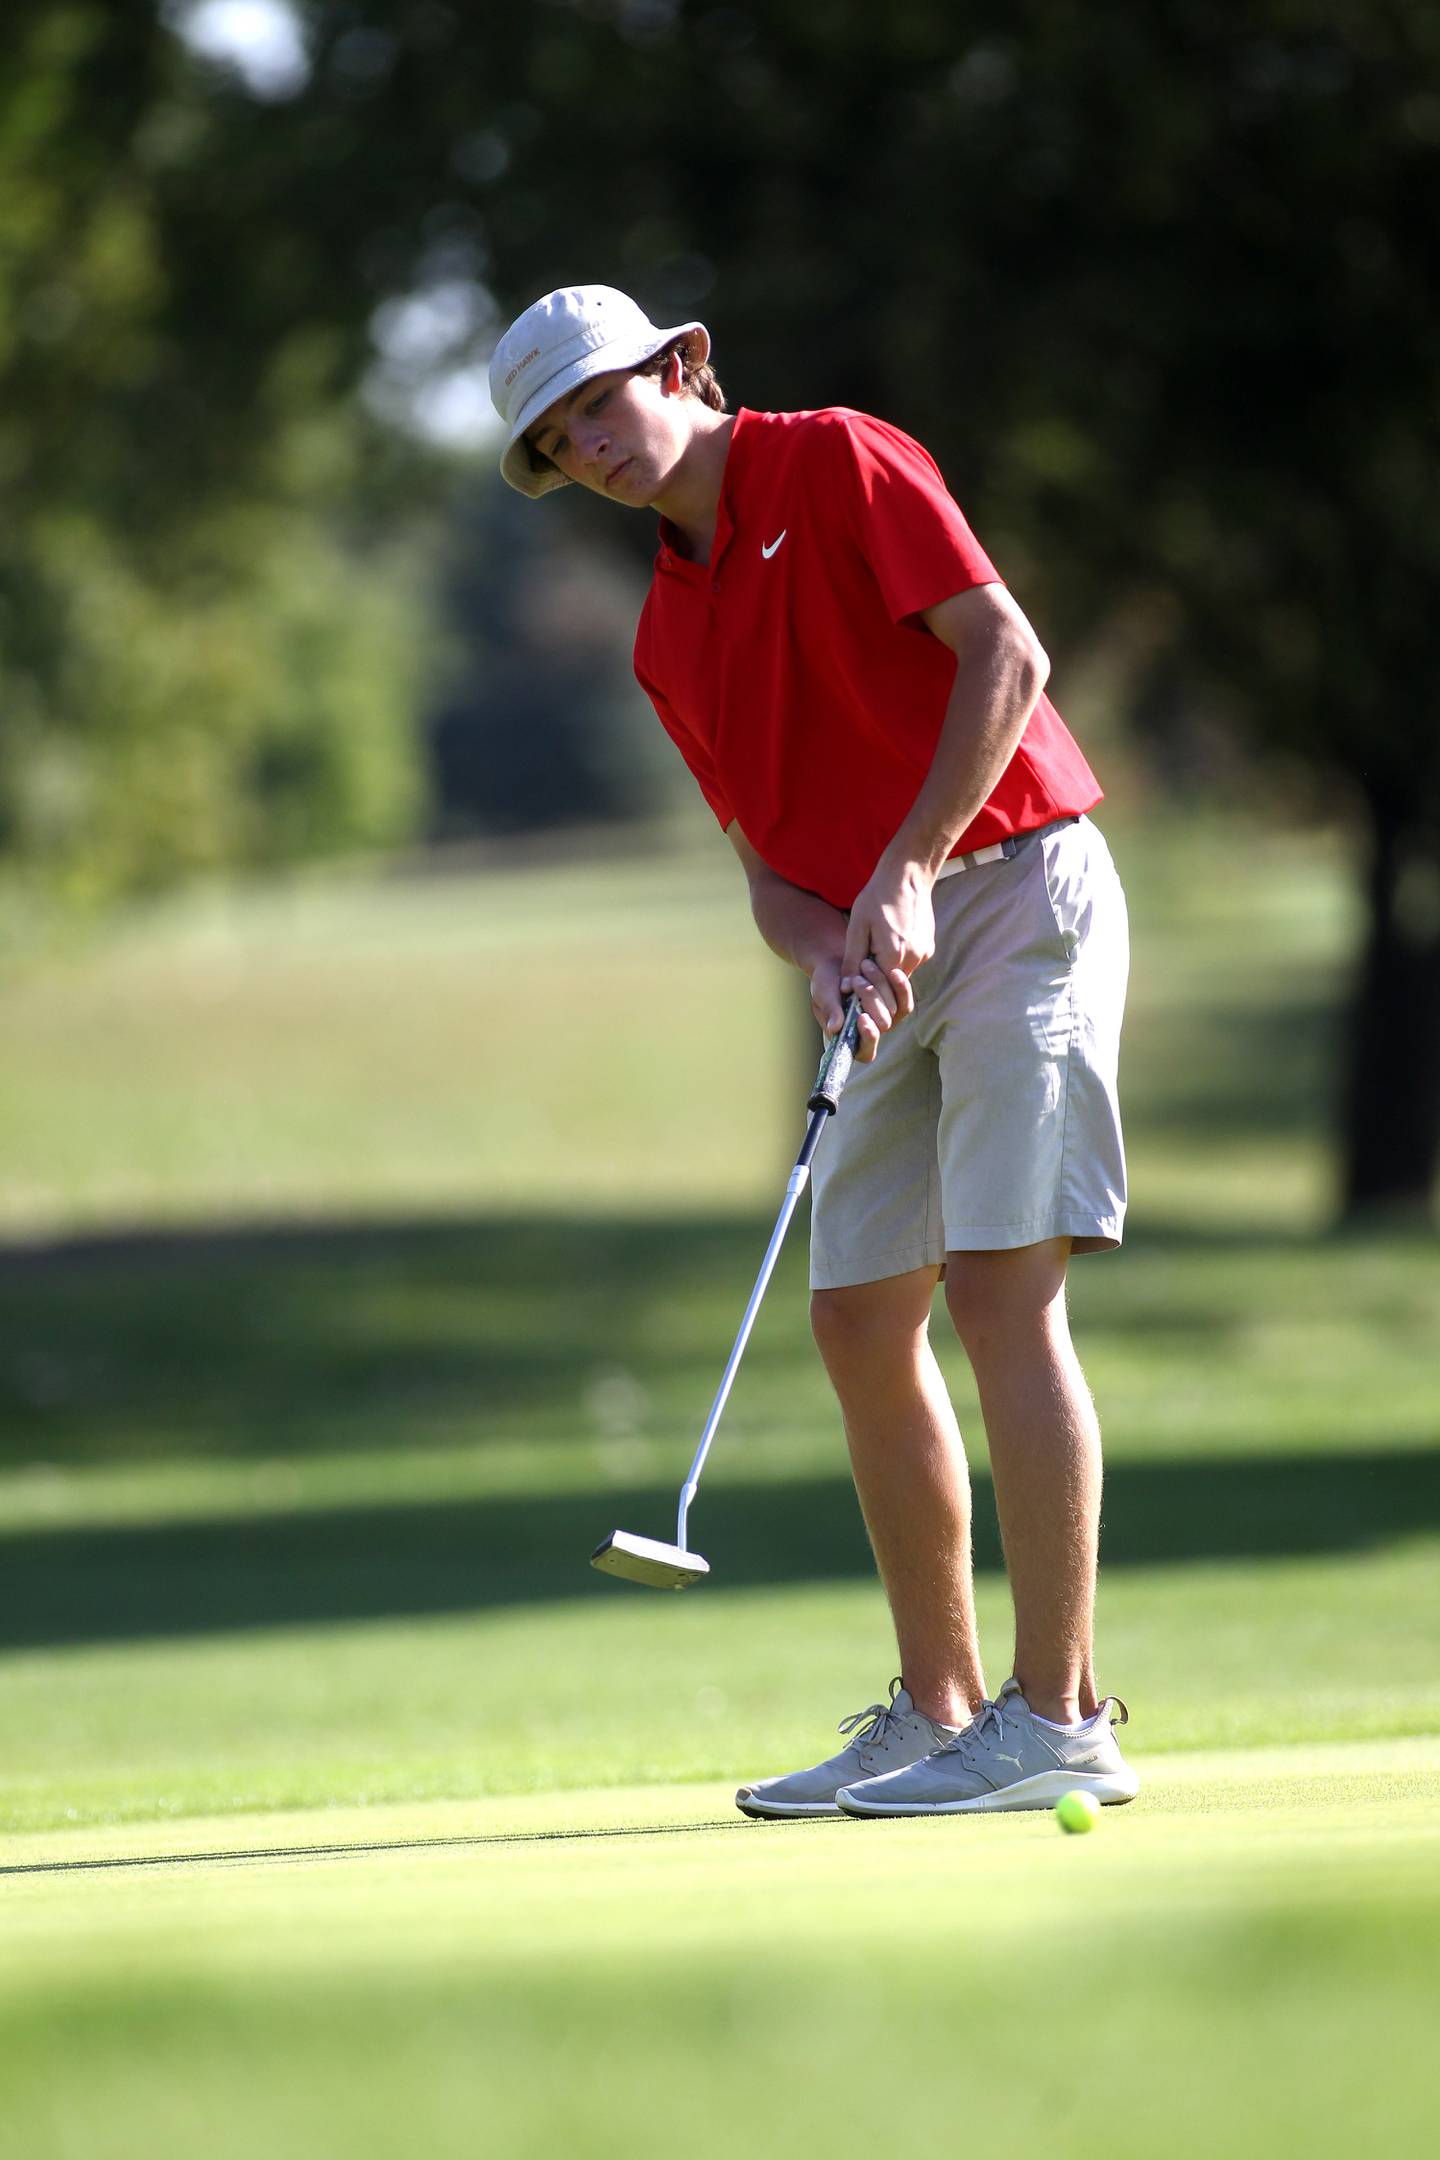 Ottawa's Drake Kauffman putts during the Interstate Eight Conference meet at Bliss Creek Golf Course in Sugar Grove on Monday, Sept. 27, 2021.